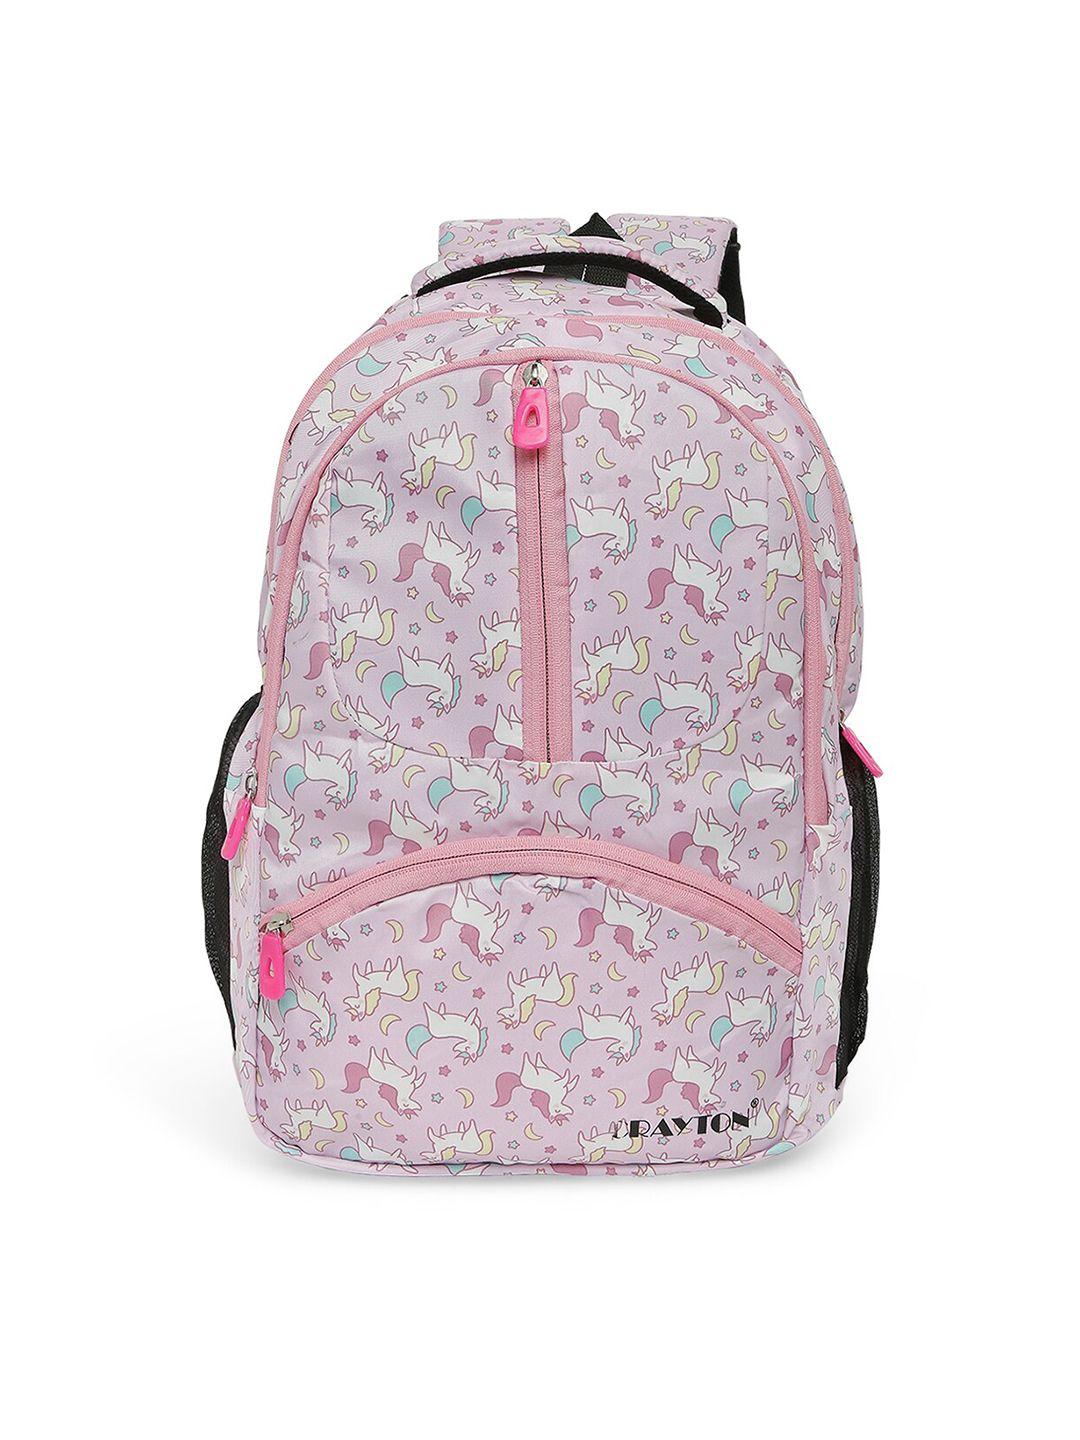 crayton unisex pink & white graphic backpack with compression straps